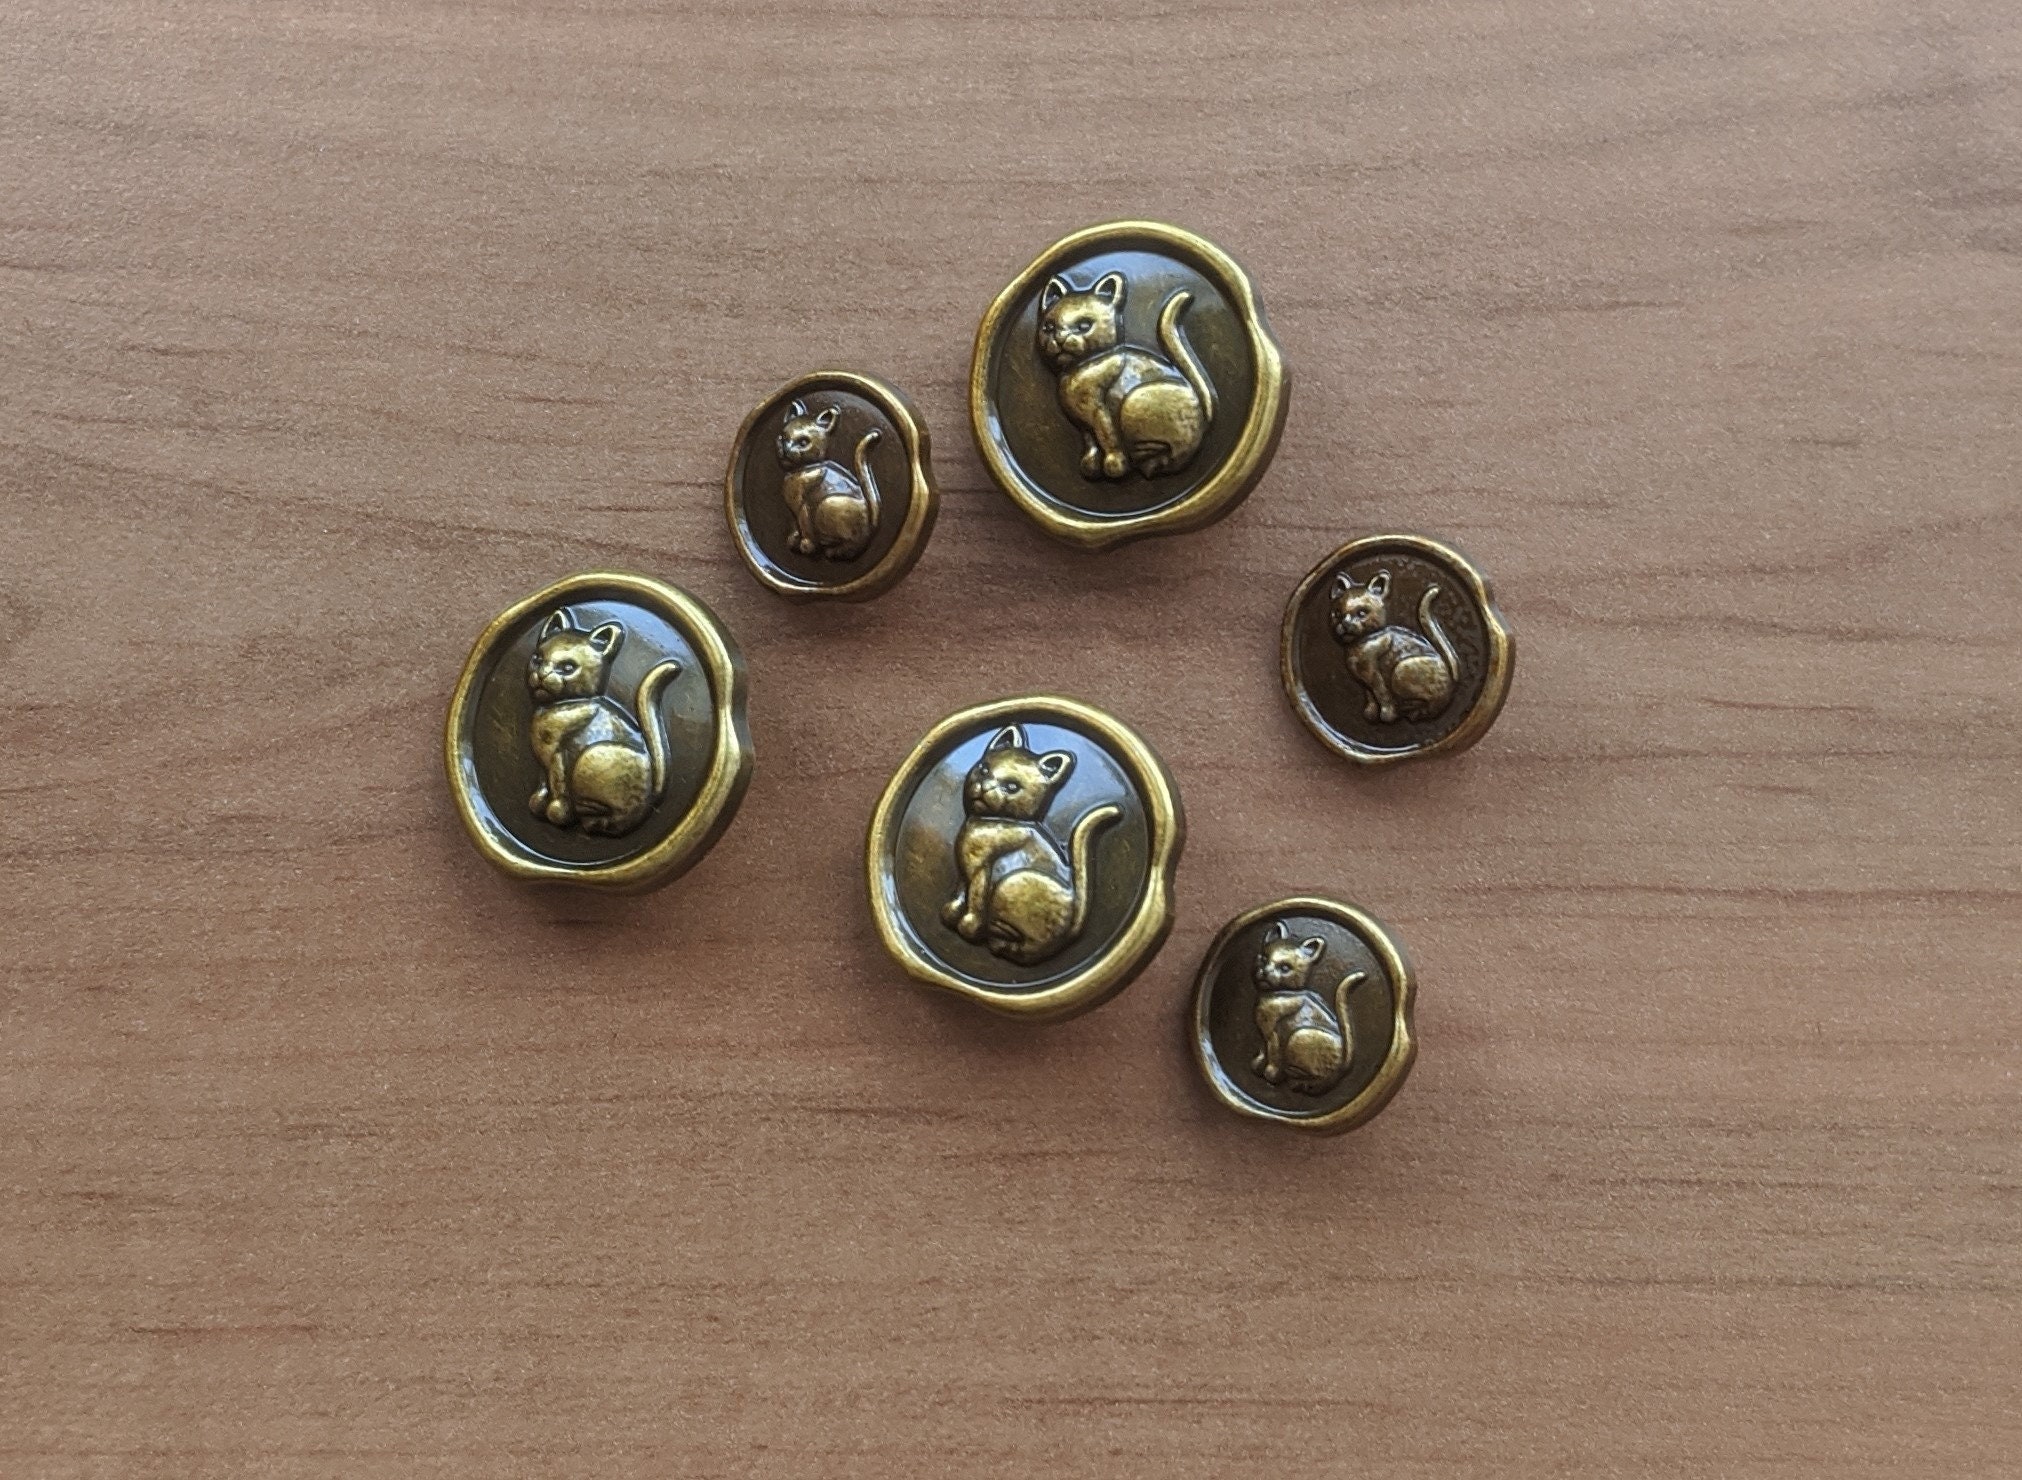 Buy Buttons Online at Wholesale Prices